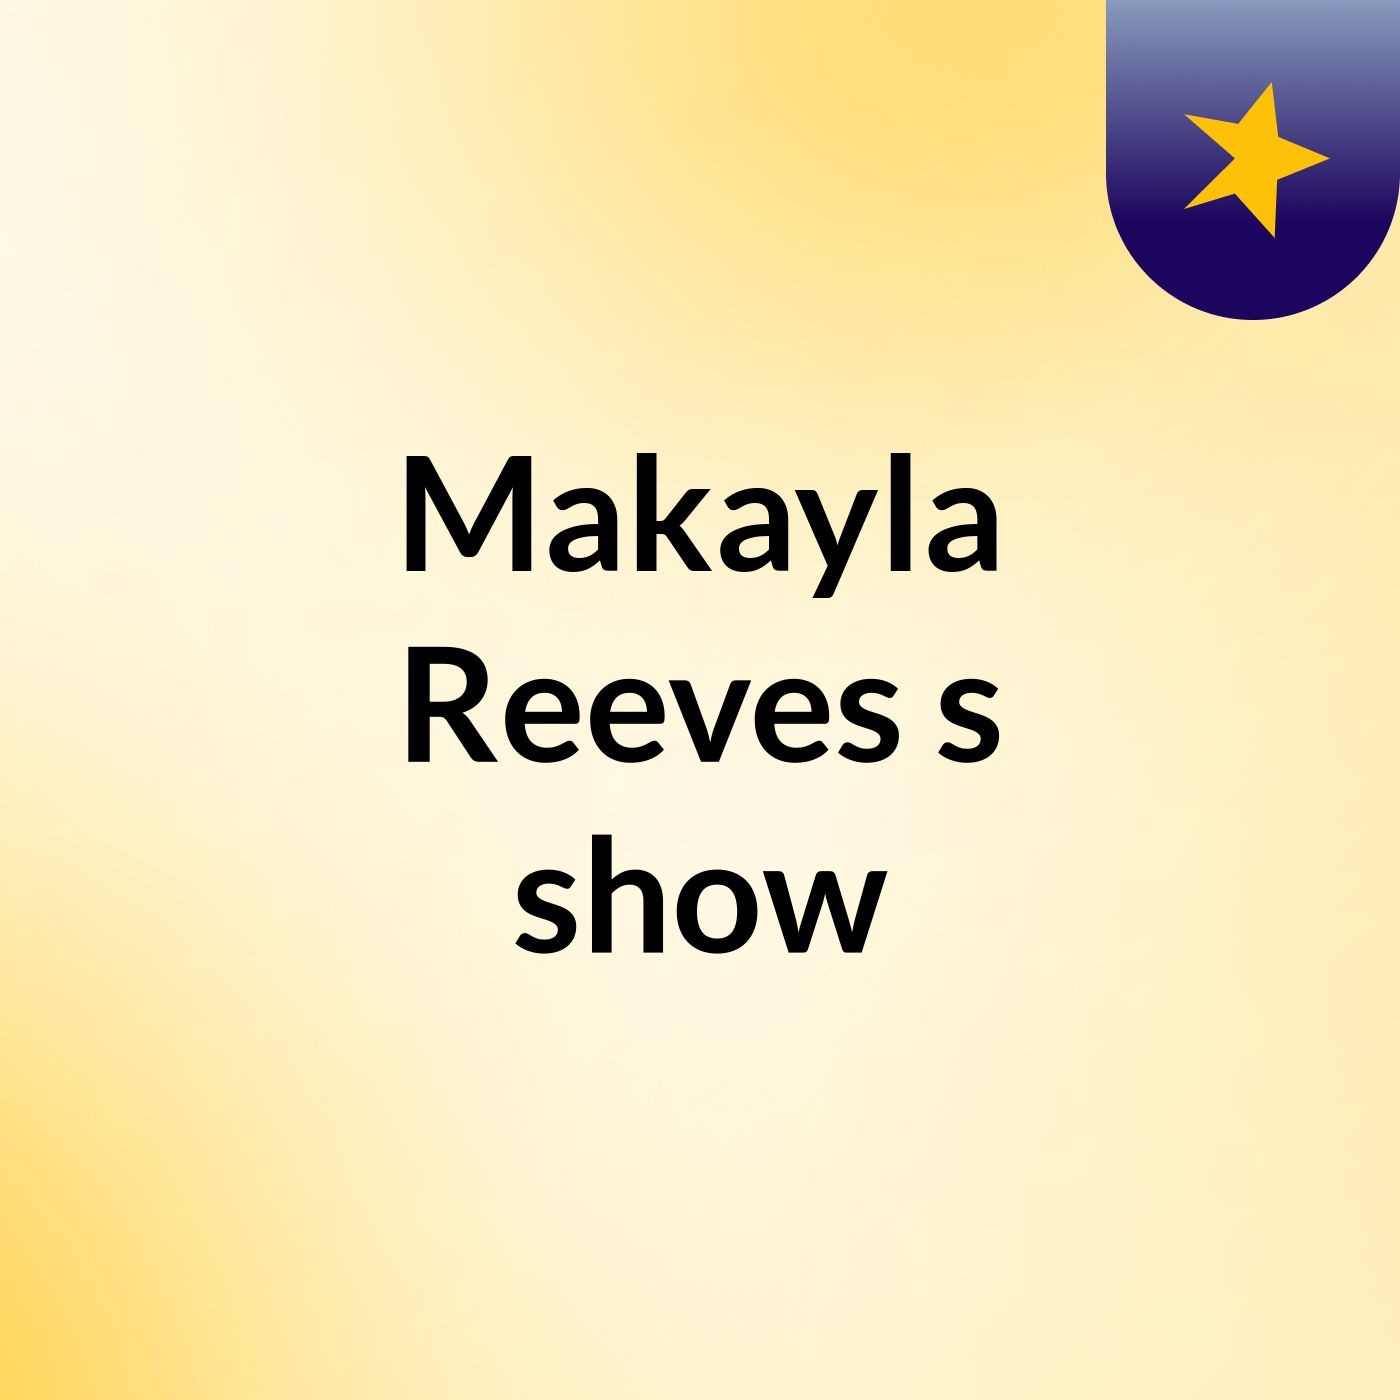 Makayla Reeves's show